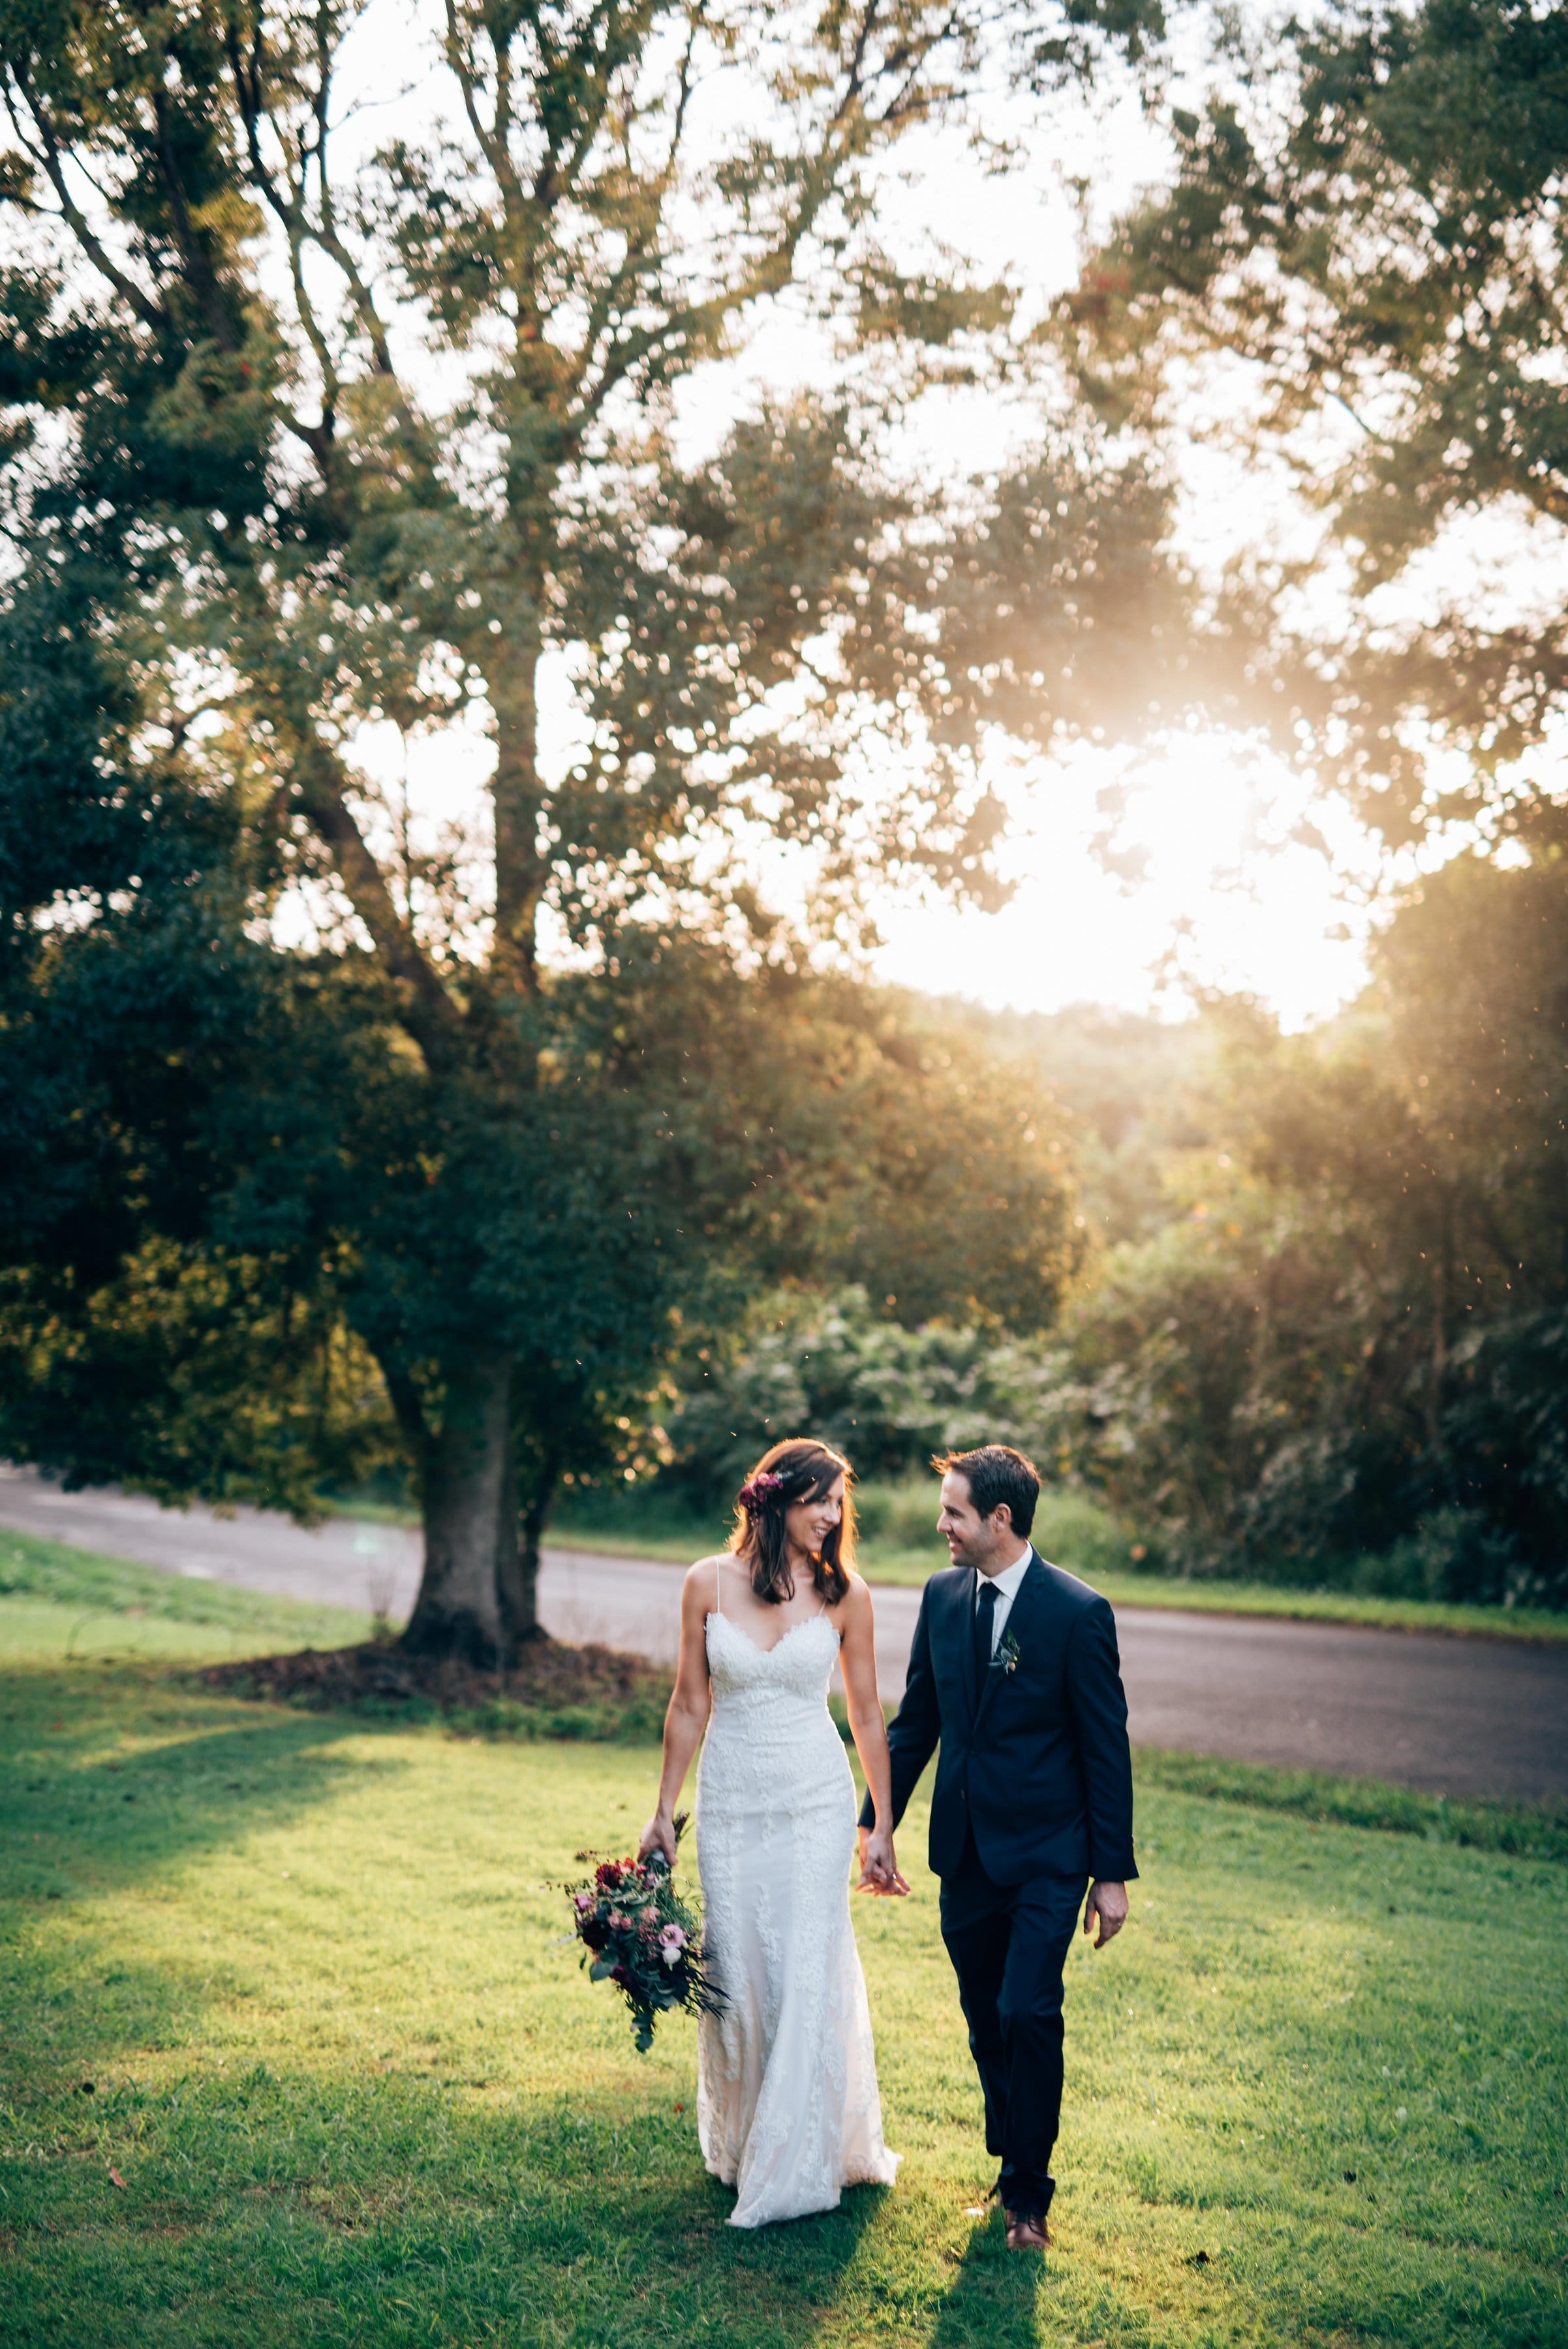 Effortlessly sexy outdoor wedding Sarah and Philip - Bride is wearing Mattea by Sottero and Midgley